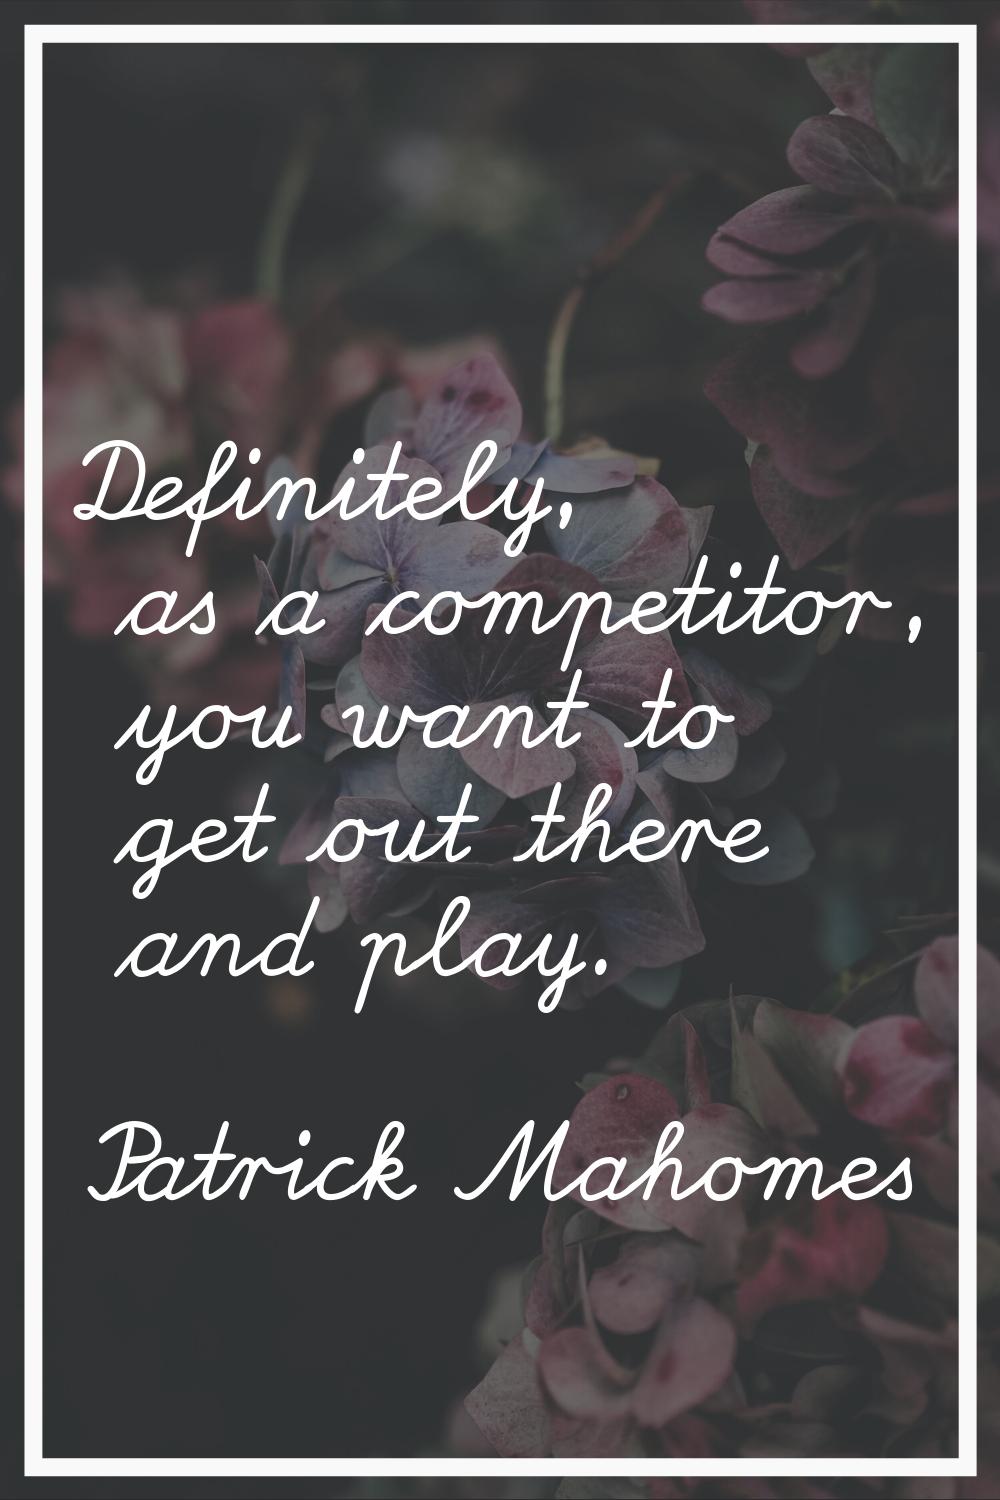 Definitely, as a competitor, you want to get out there and play.